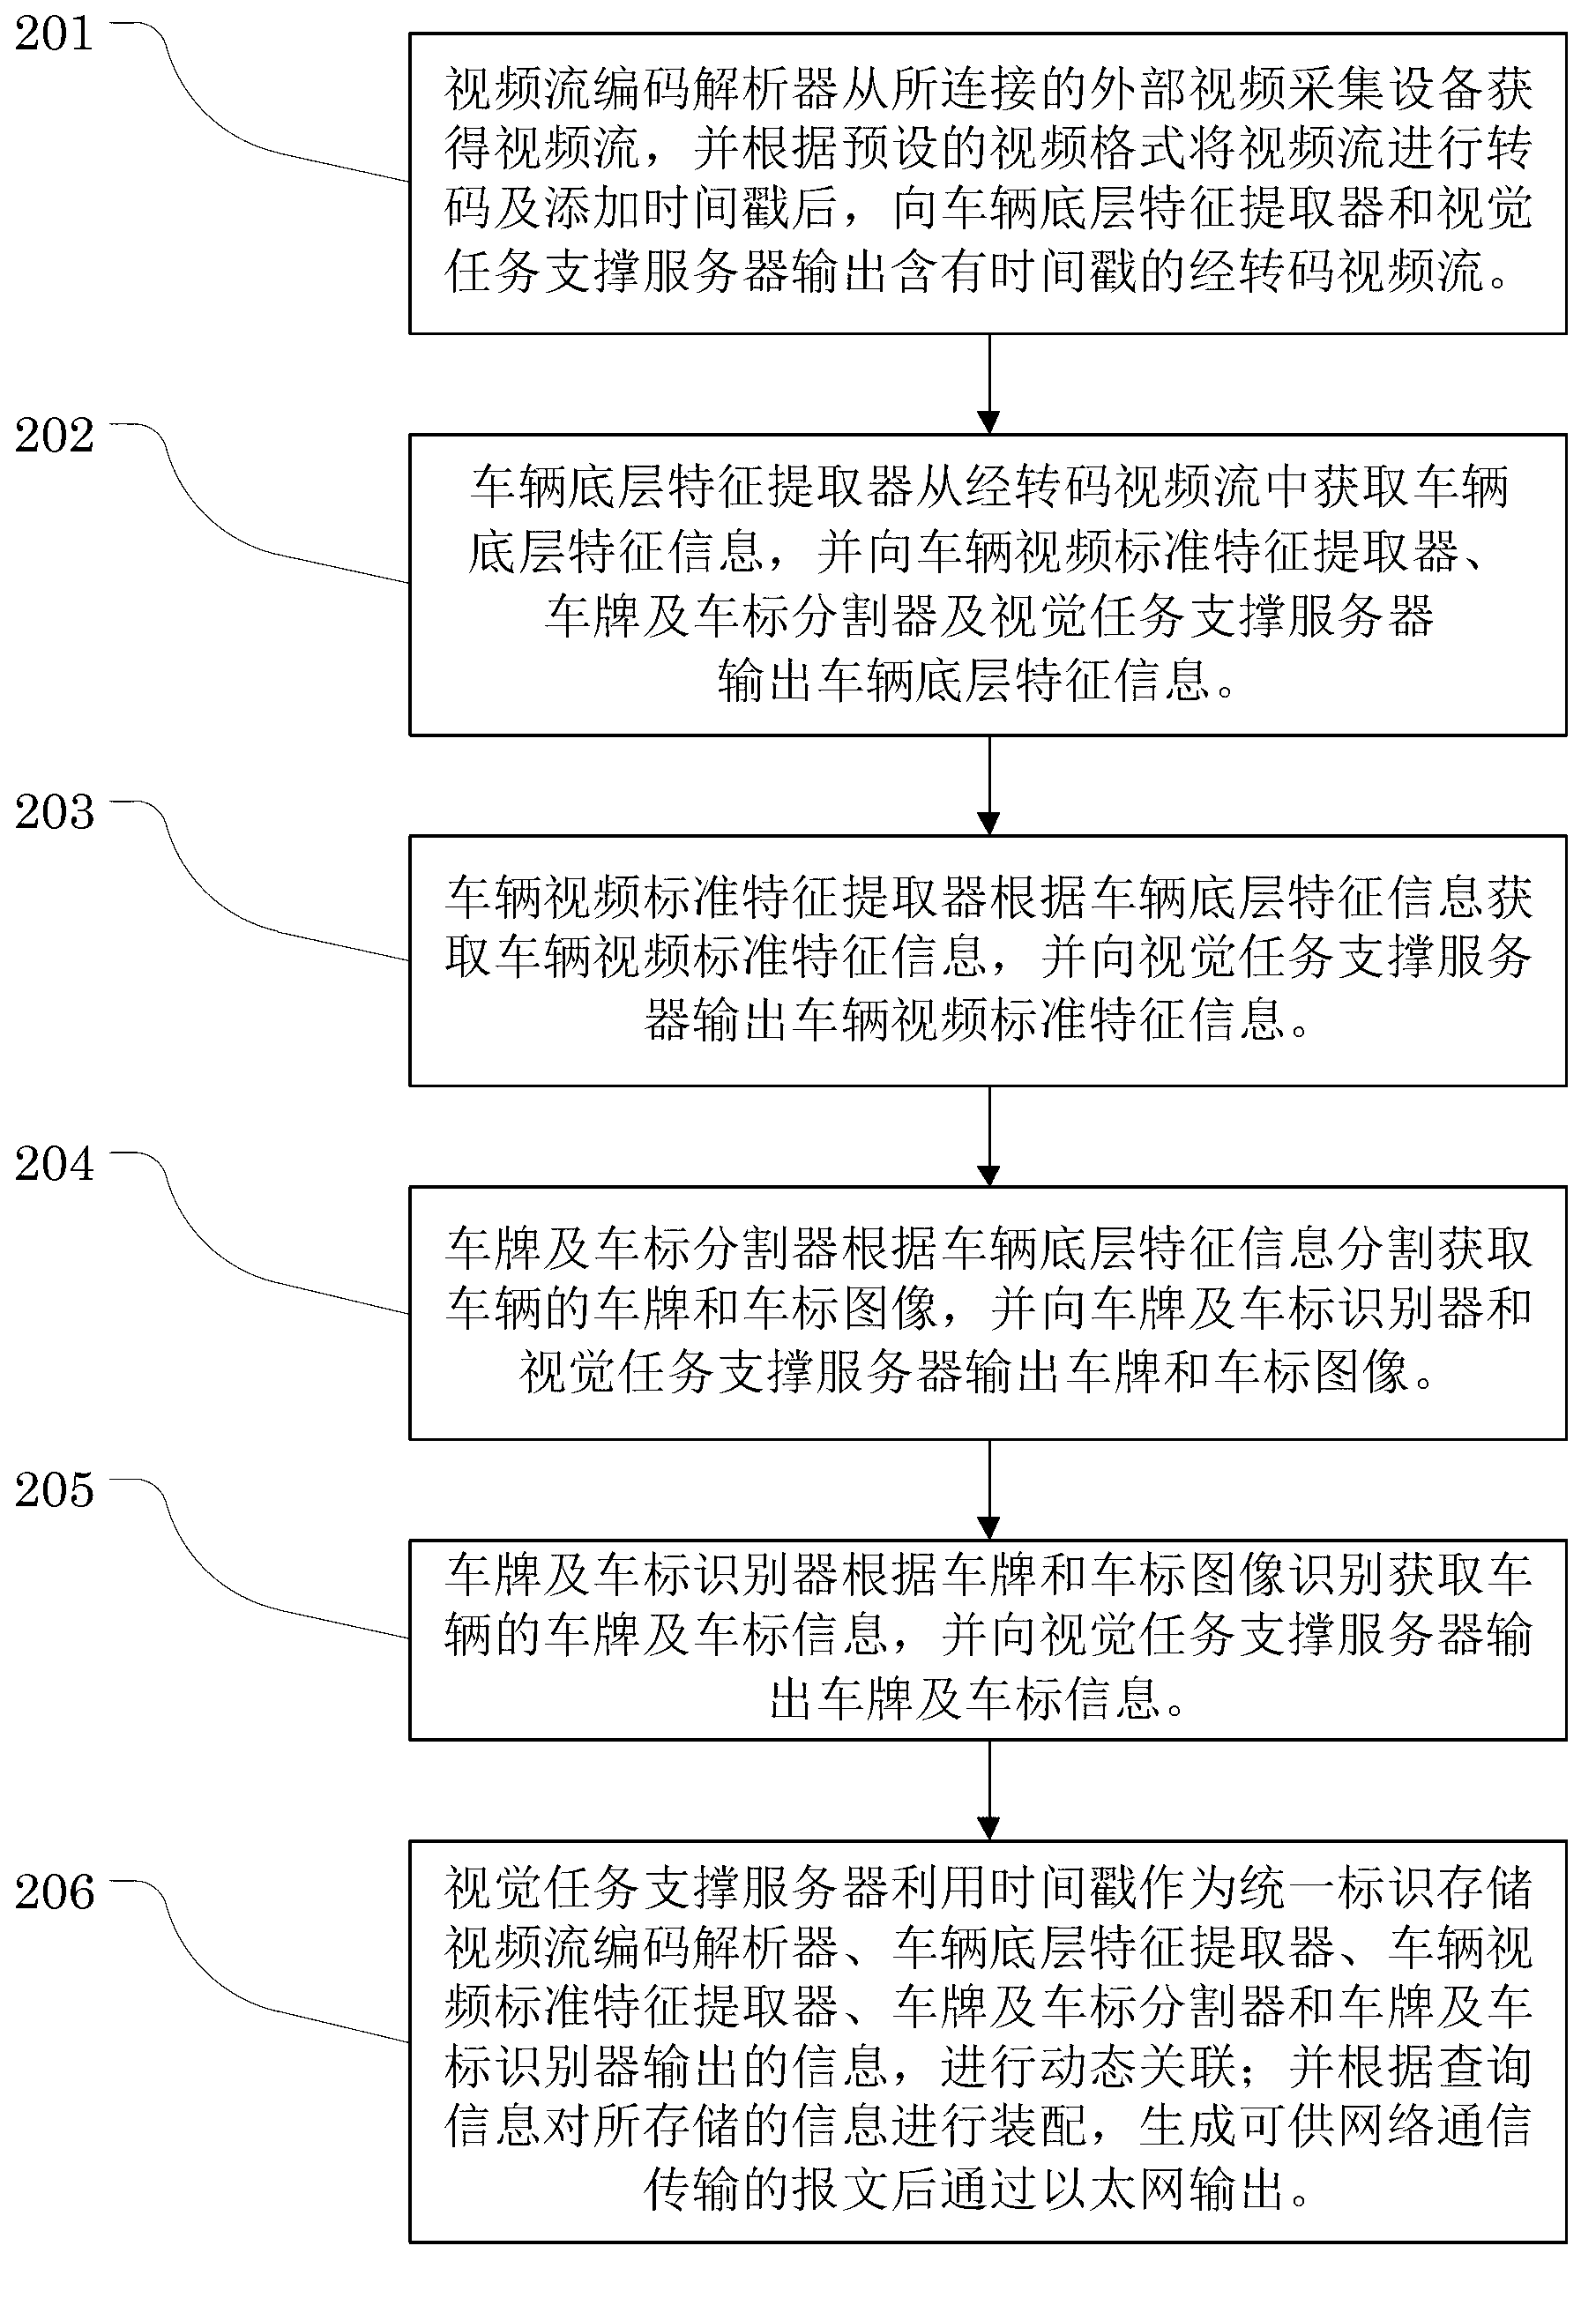 Vehicle video characteristic extraction system and vehicle video characteristic extraction method based on video structure description